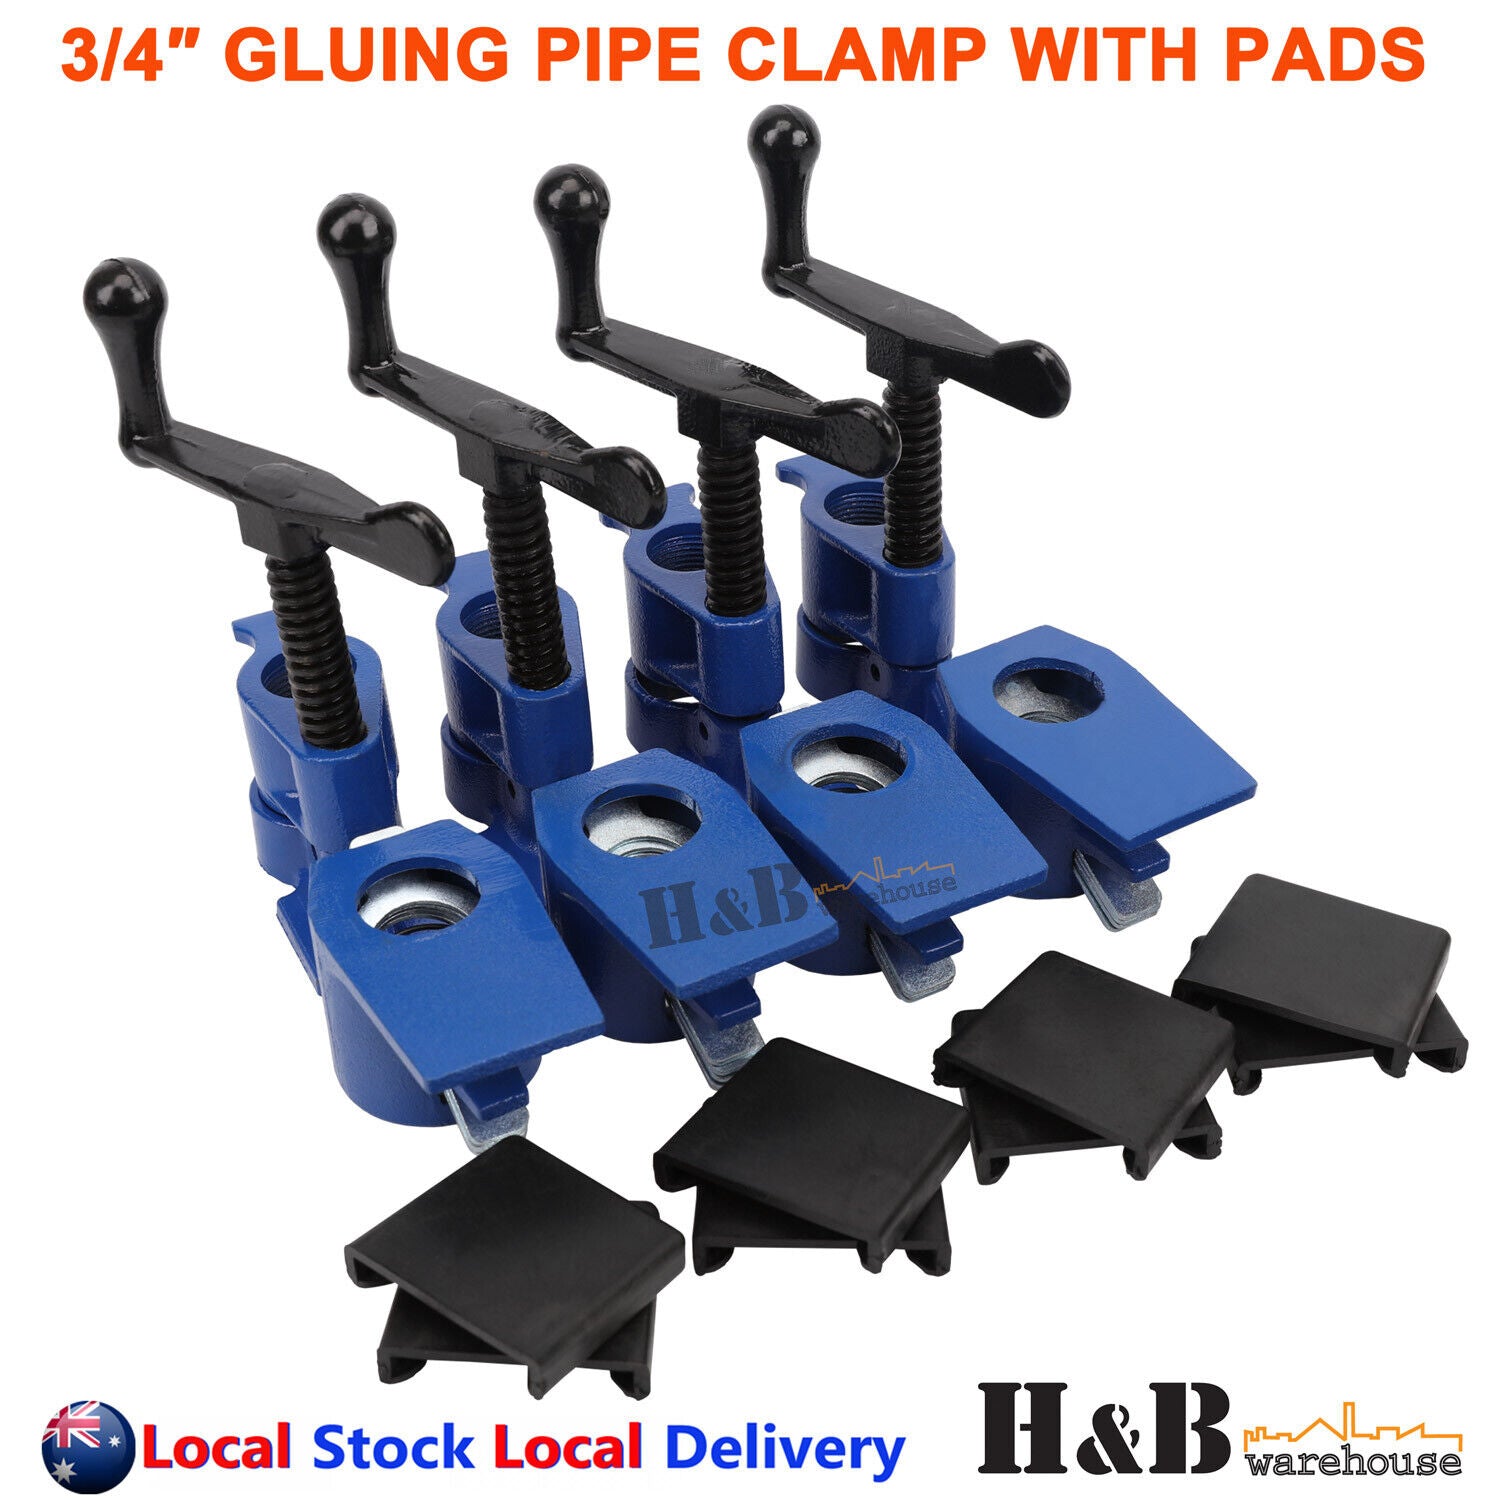 4 Pcs Heavy Duty 3/4" Gluing Pipe Clamp Vice Vise Tool Wide Protect Pads SALE!!!